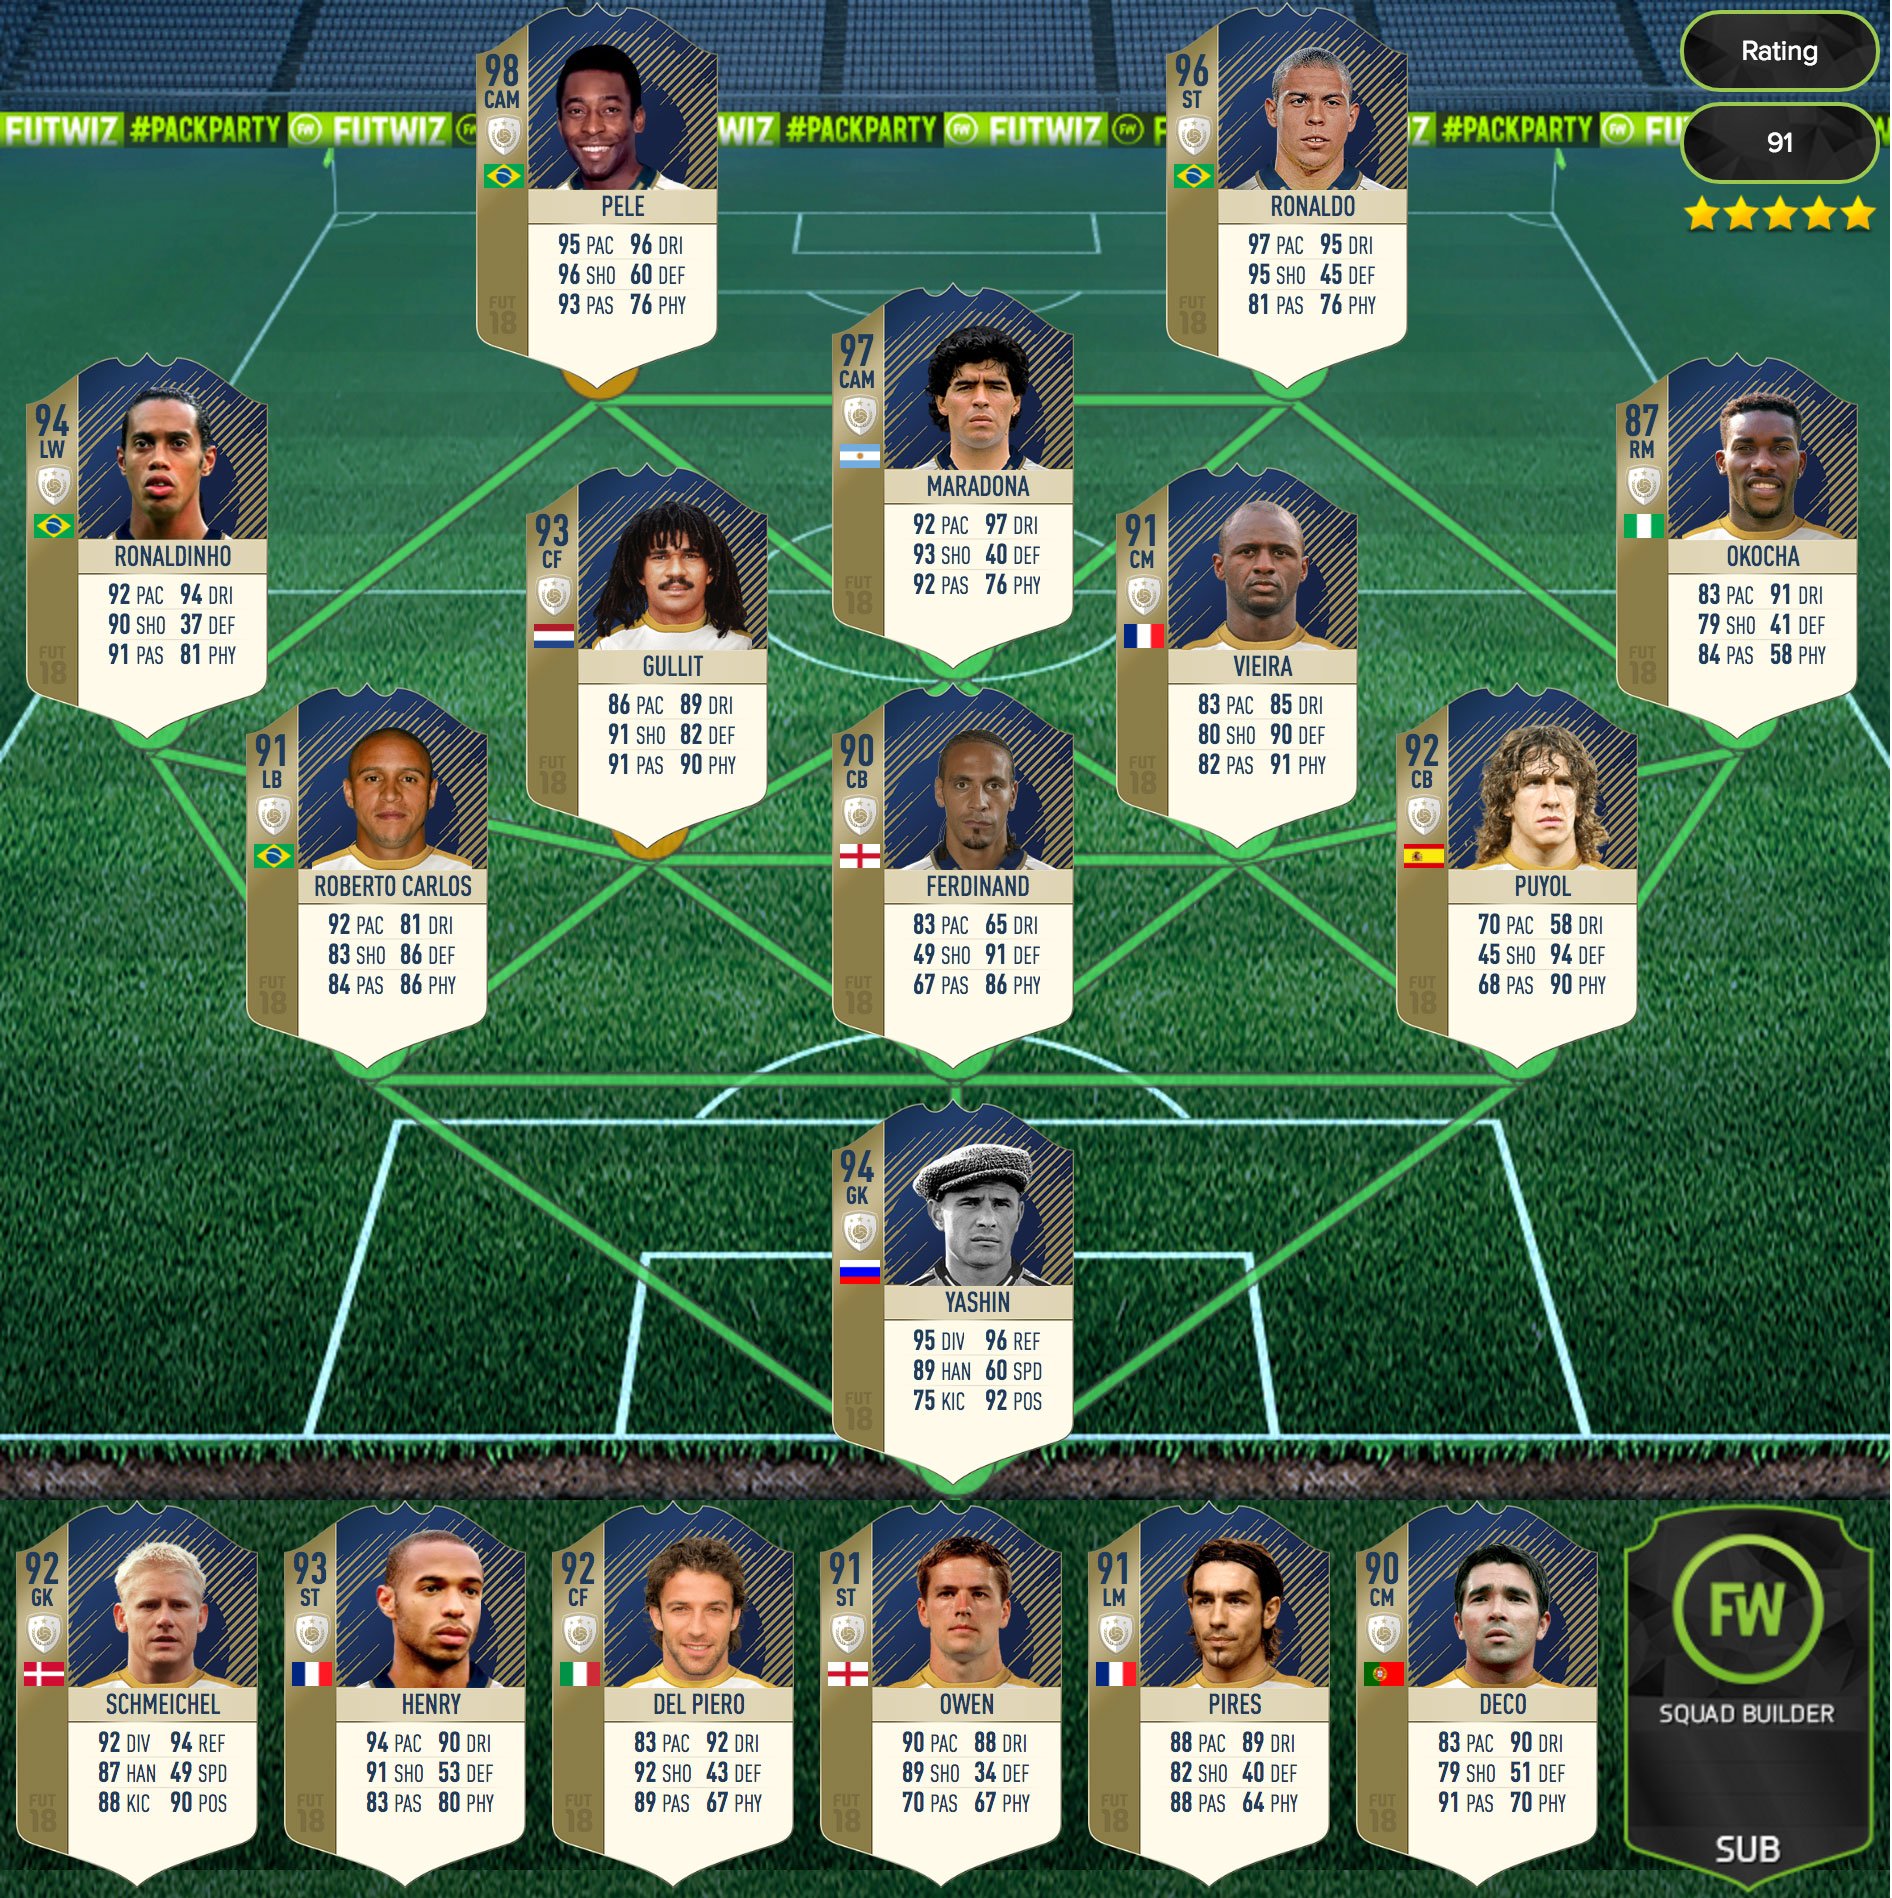 𝙁𝙐𝙏𝙒𝙄𝙕 on Twitter: #icons are available in our generations squad builder! Start planning your #fifa18 squads! https://t.co/XBT4ugn4bu https://t.co/wkil8KTtQ3" /